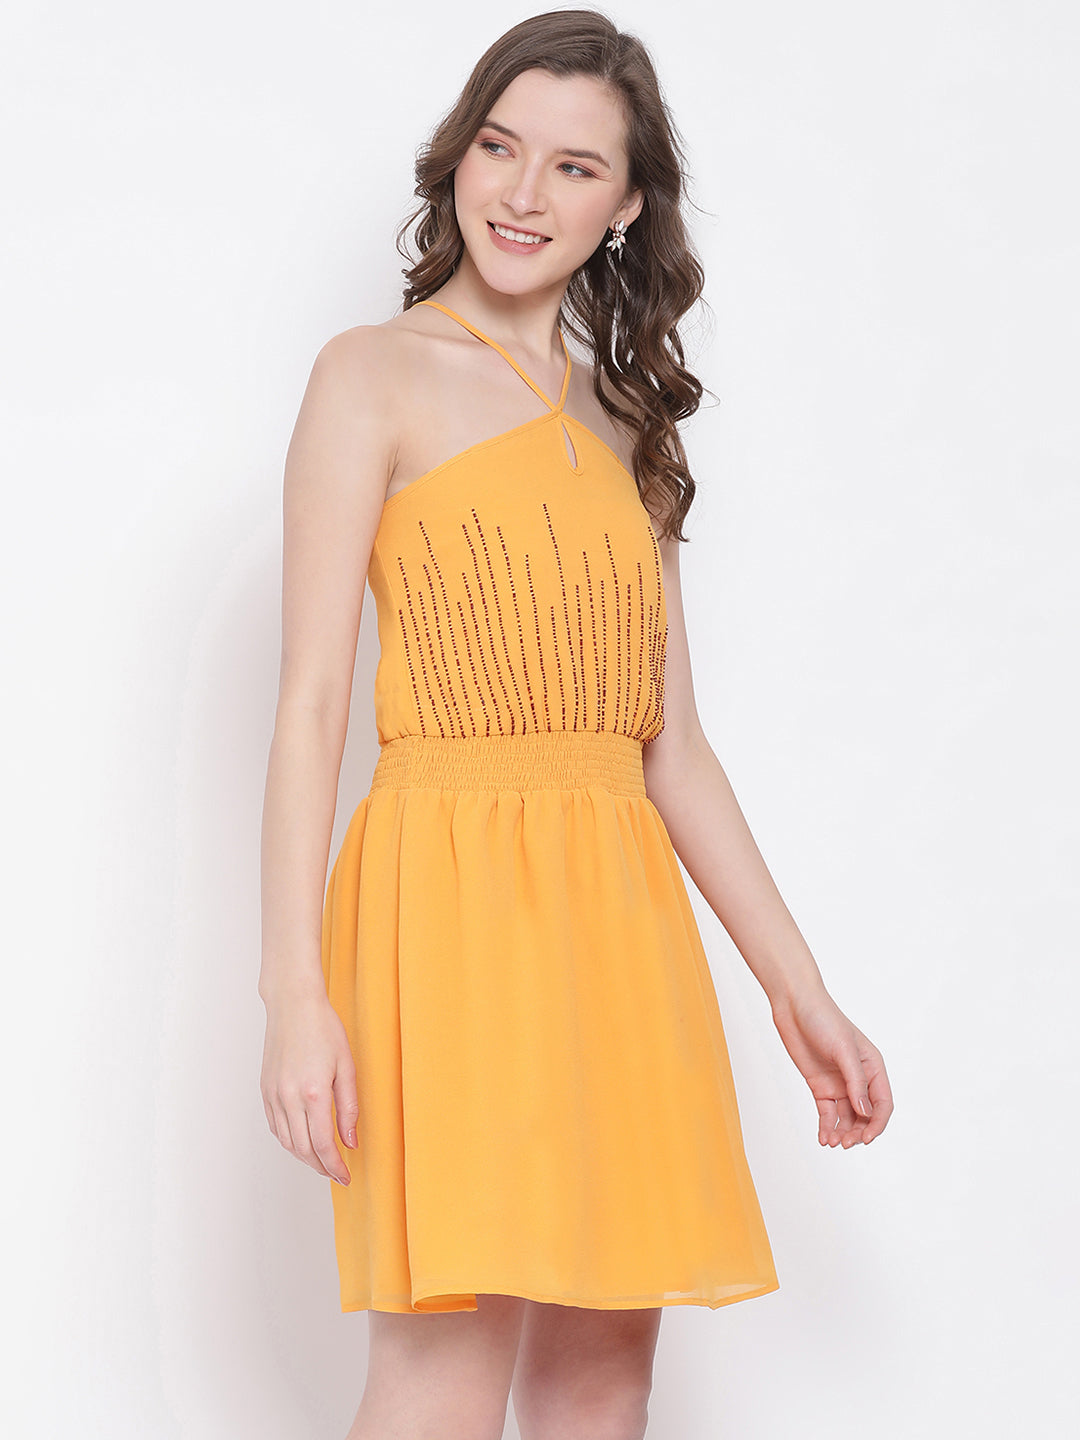 LY2 Polyester Mustard Halter Neck Short Sleeves Fit and Flare Party Dress For Women